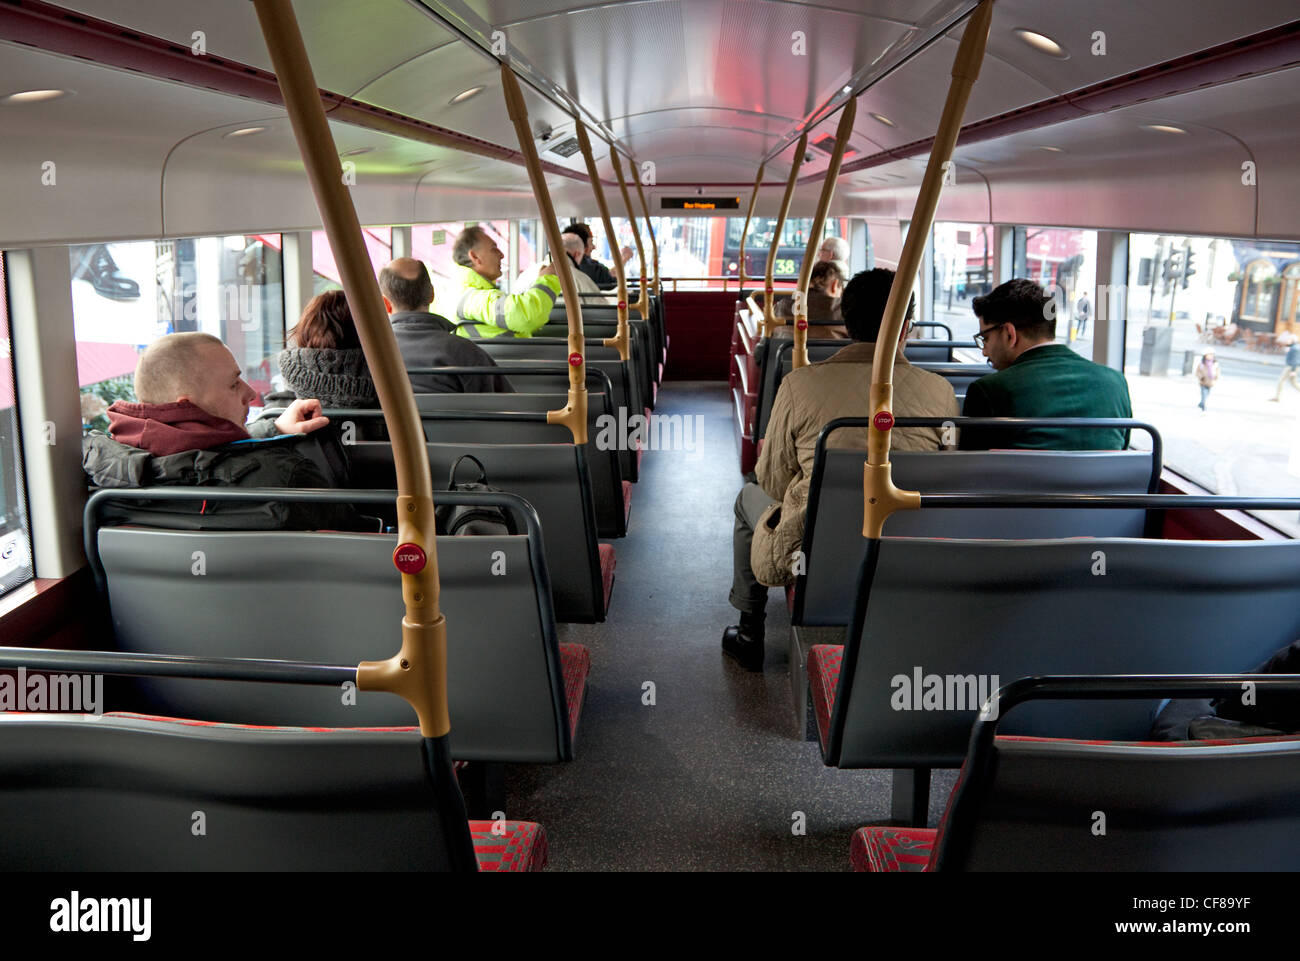 New Routemaster bus, London - upper deck Stock Photo